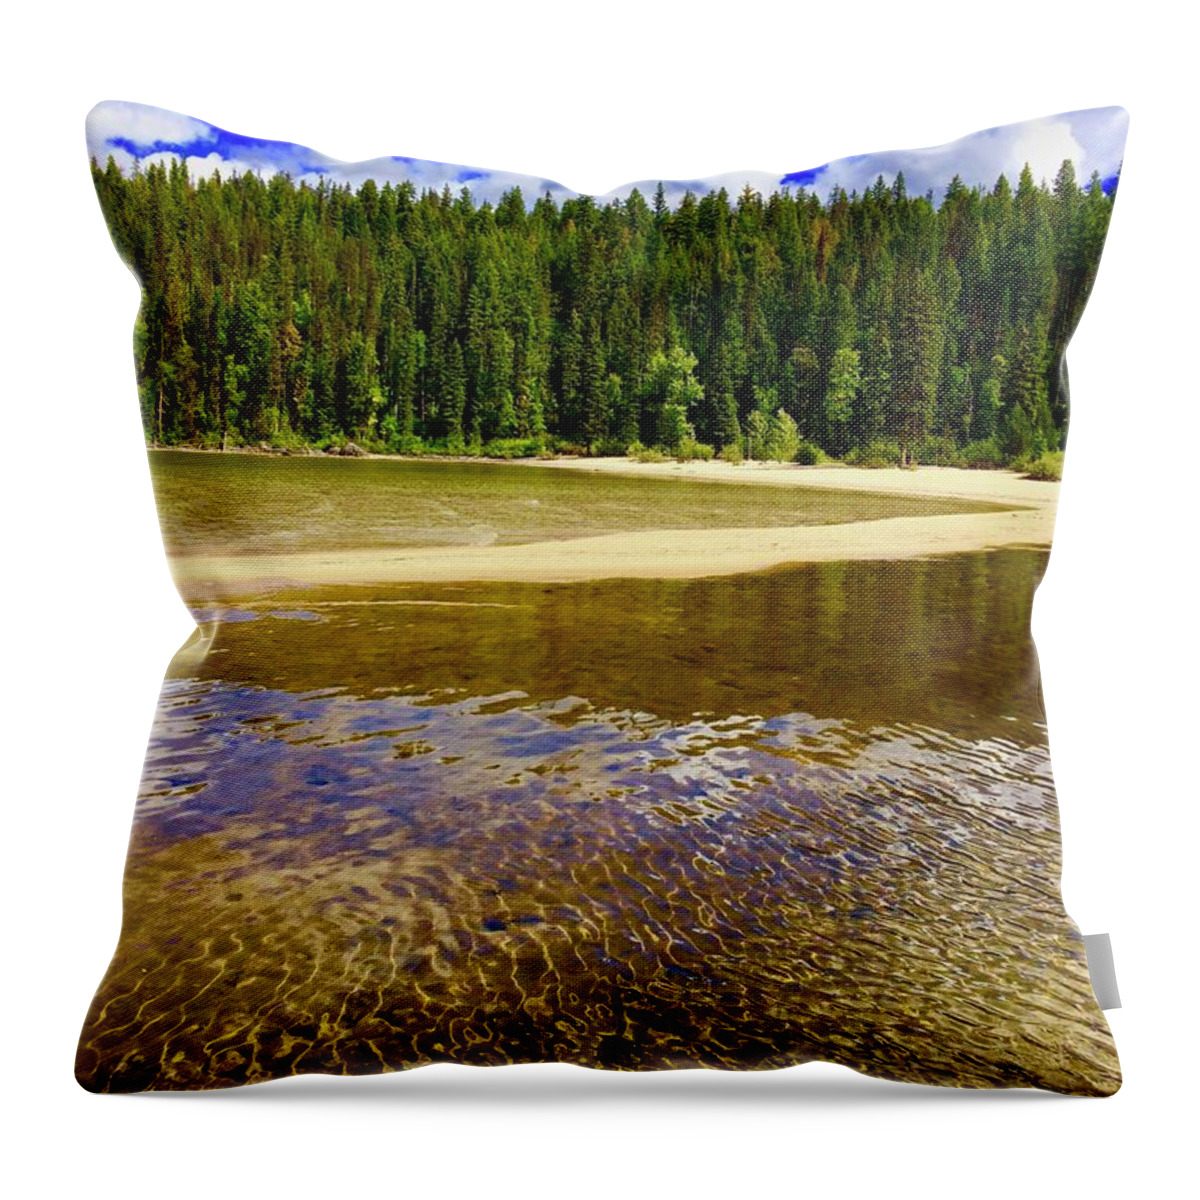 Murtle Lake Blue River Throw Pillow featuring the photograph Site #1 Murtle Lake Blue River by Gregory Merlin Brown